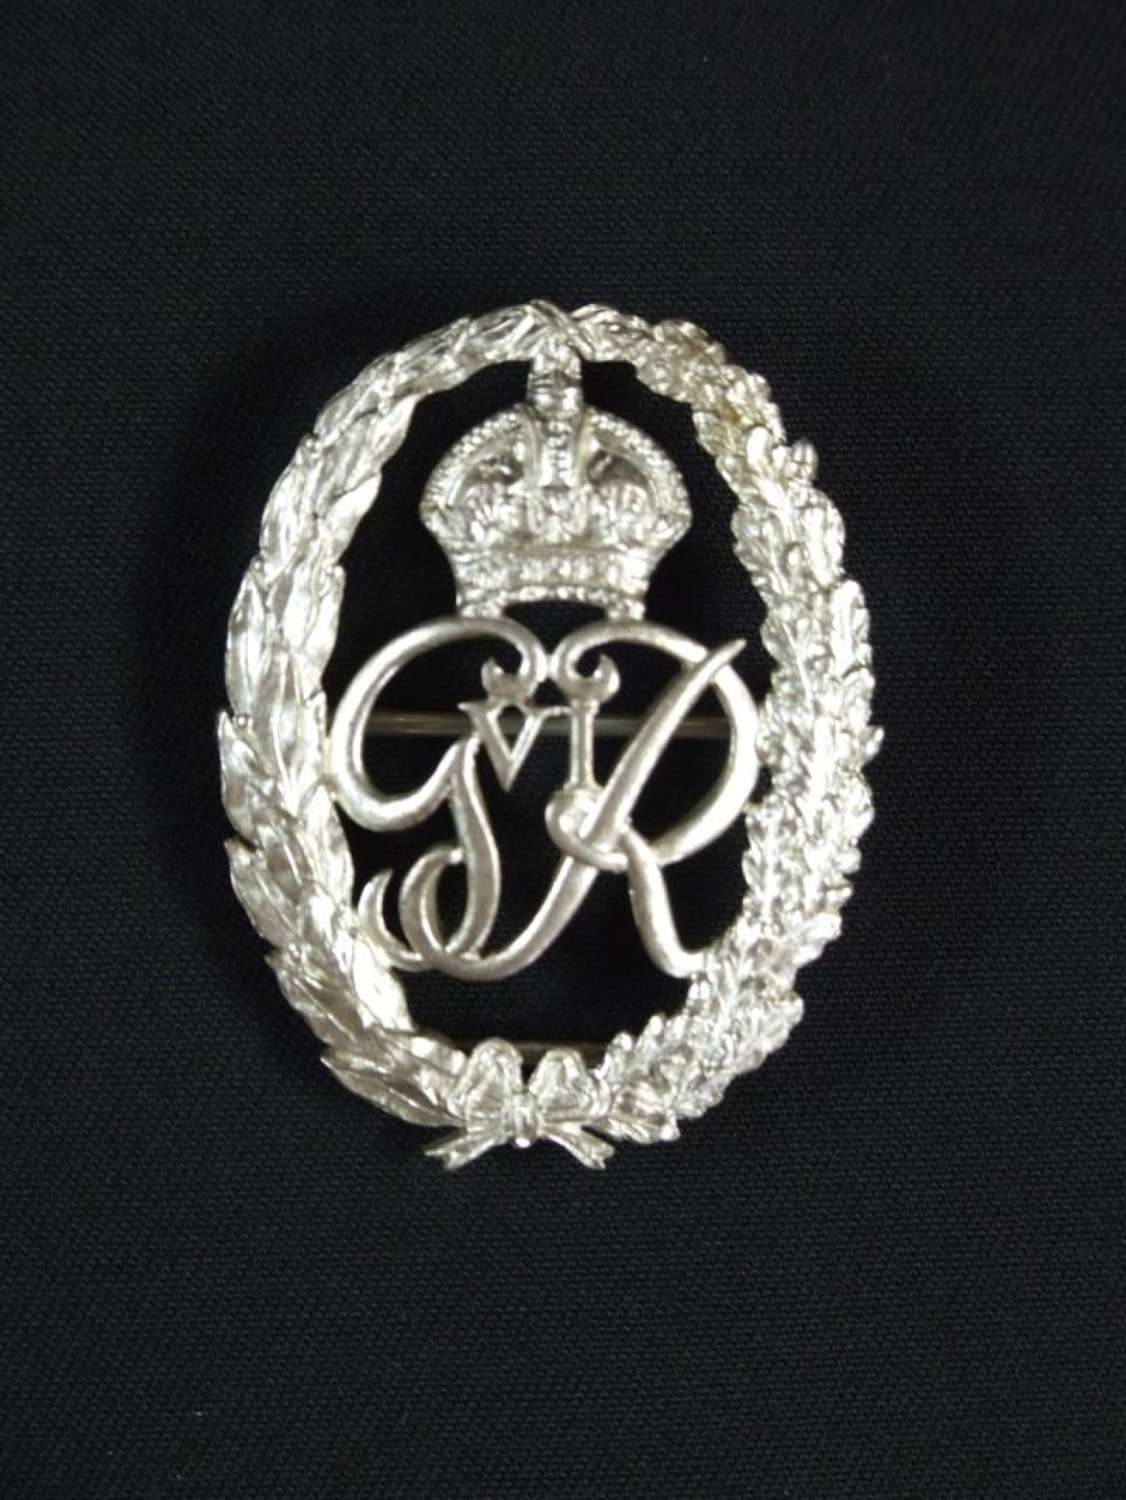 A  George VI Honorary Chaplain to the King badge in silver